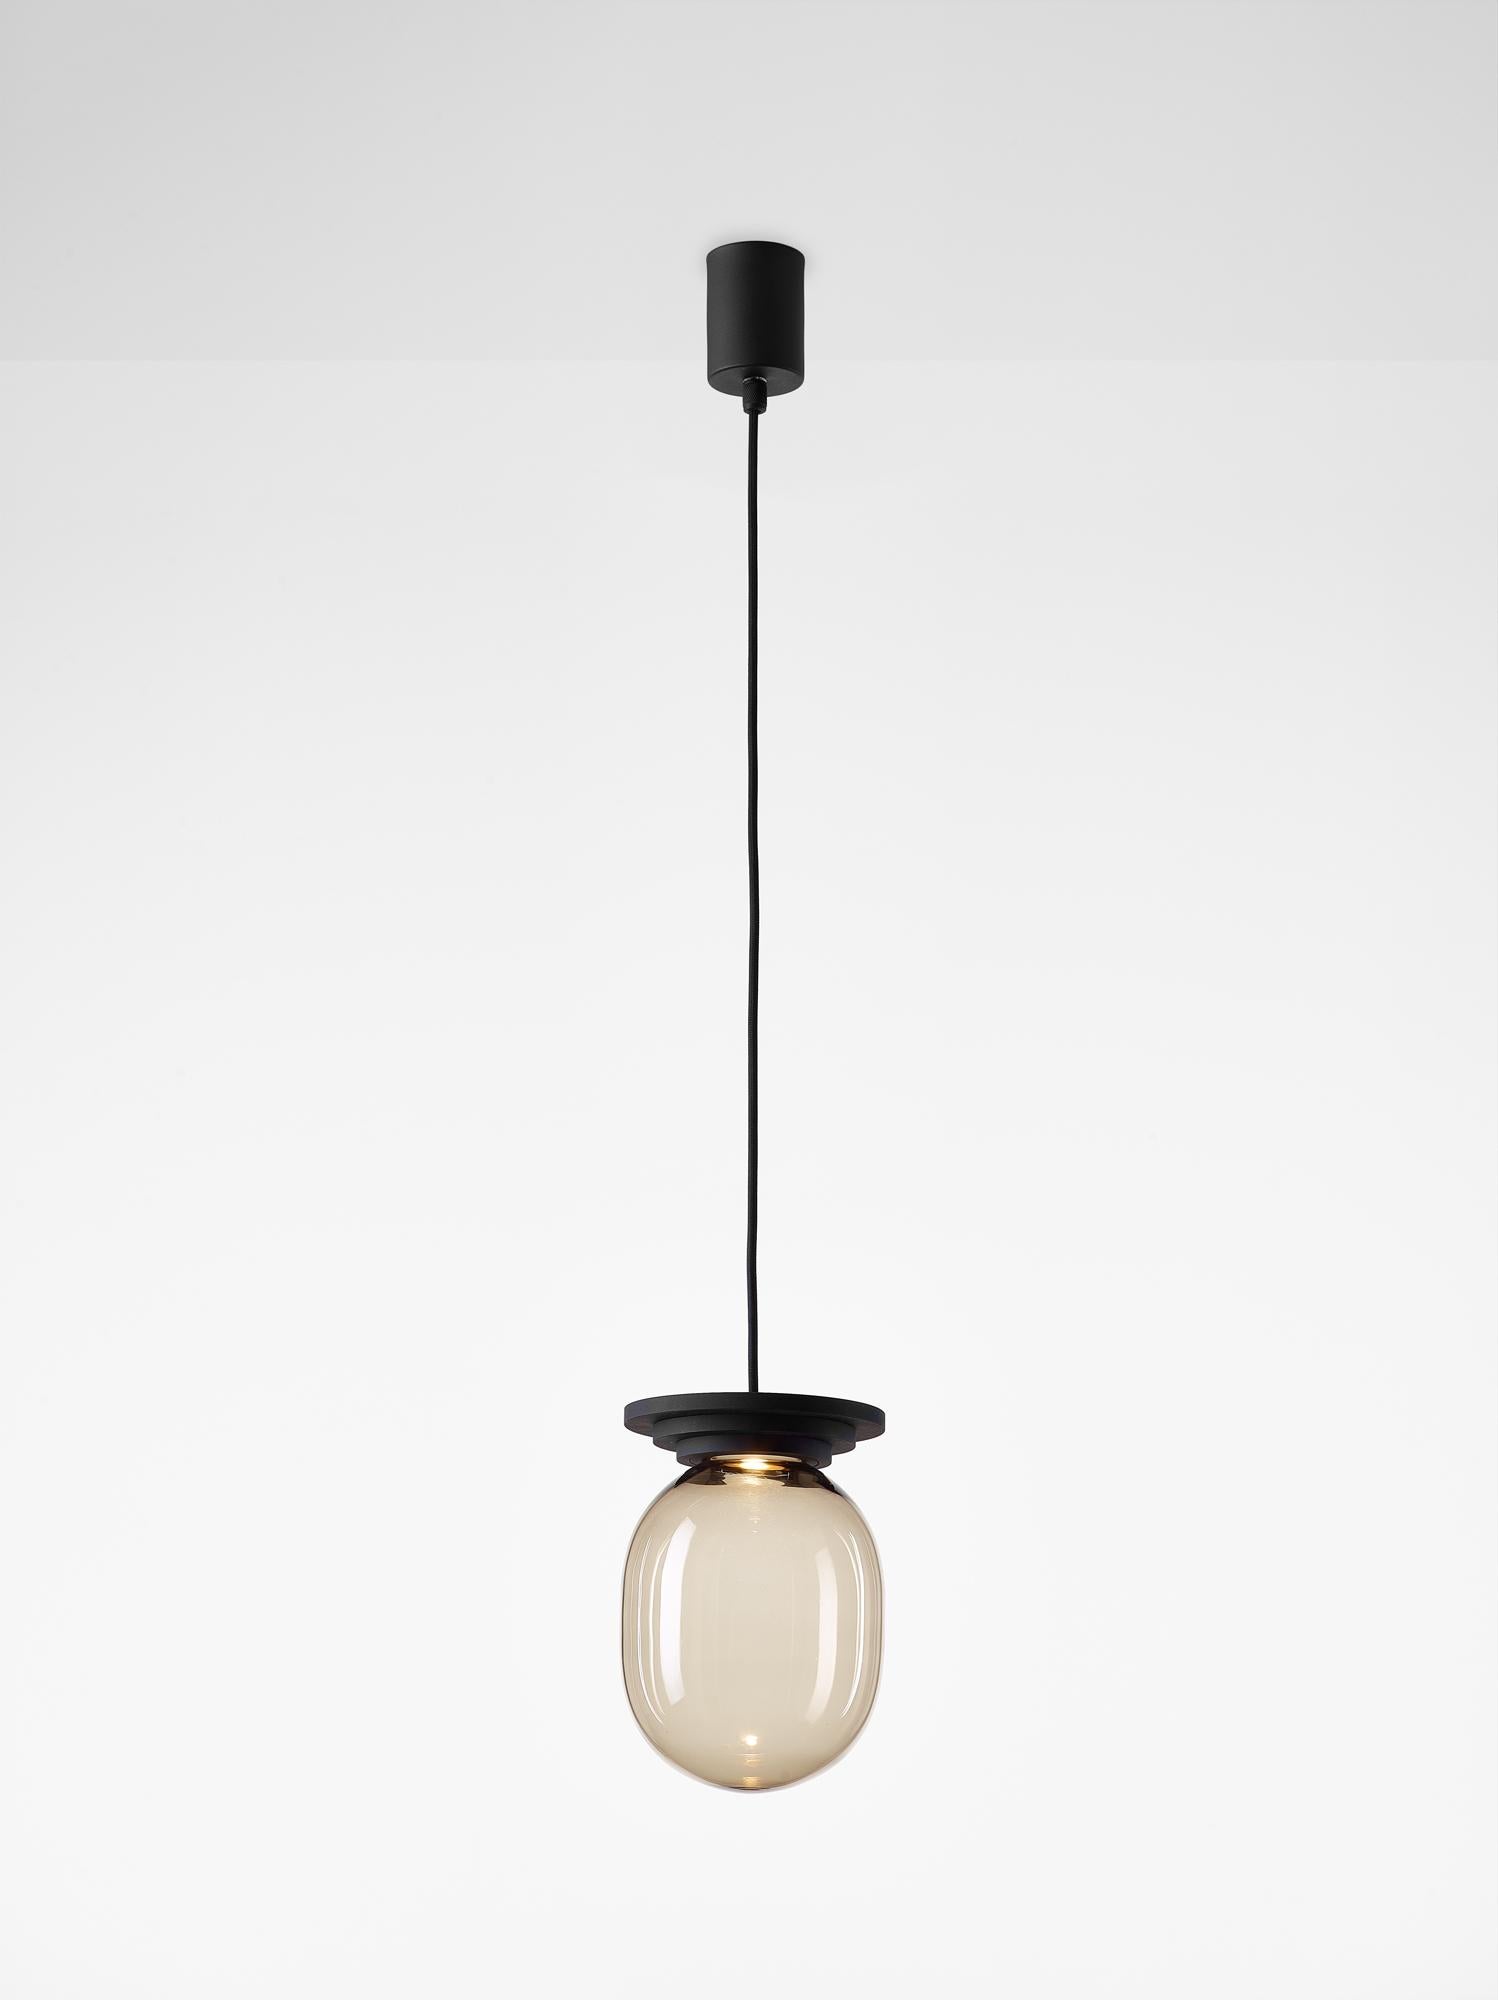 Black stratos big capsule pendant light by Dechem Studio
Dimensions: D 20 x H 28 cm.
Materials: aluminum, glass.
Also available: different colours available.

Different shapes of capsules and spheres contrast with anodized alloy fixtures,